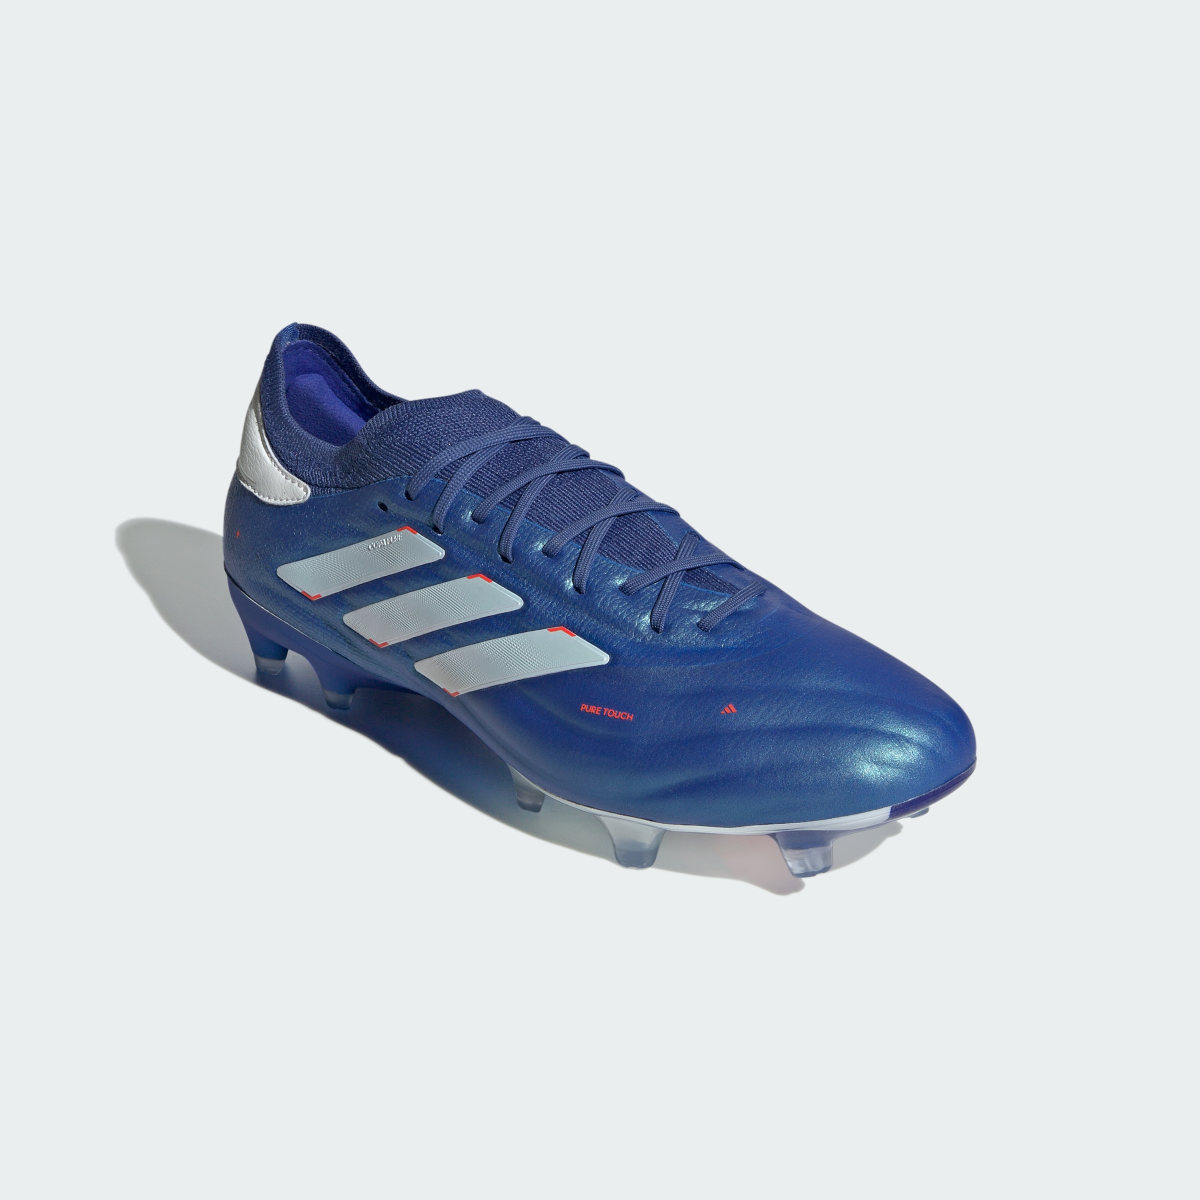 Adidas Copa Pure II+ Firm Ground Boots. 9